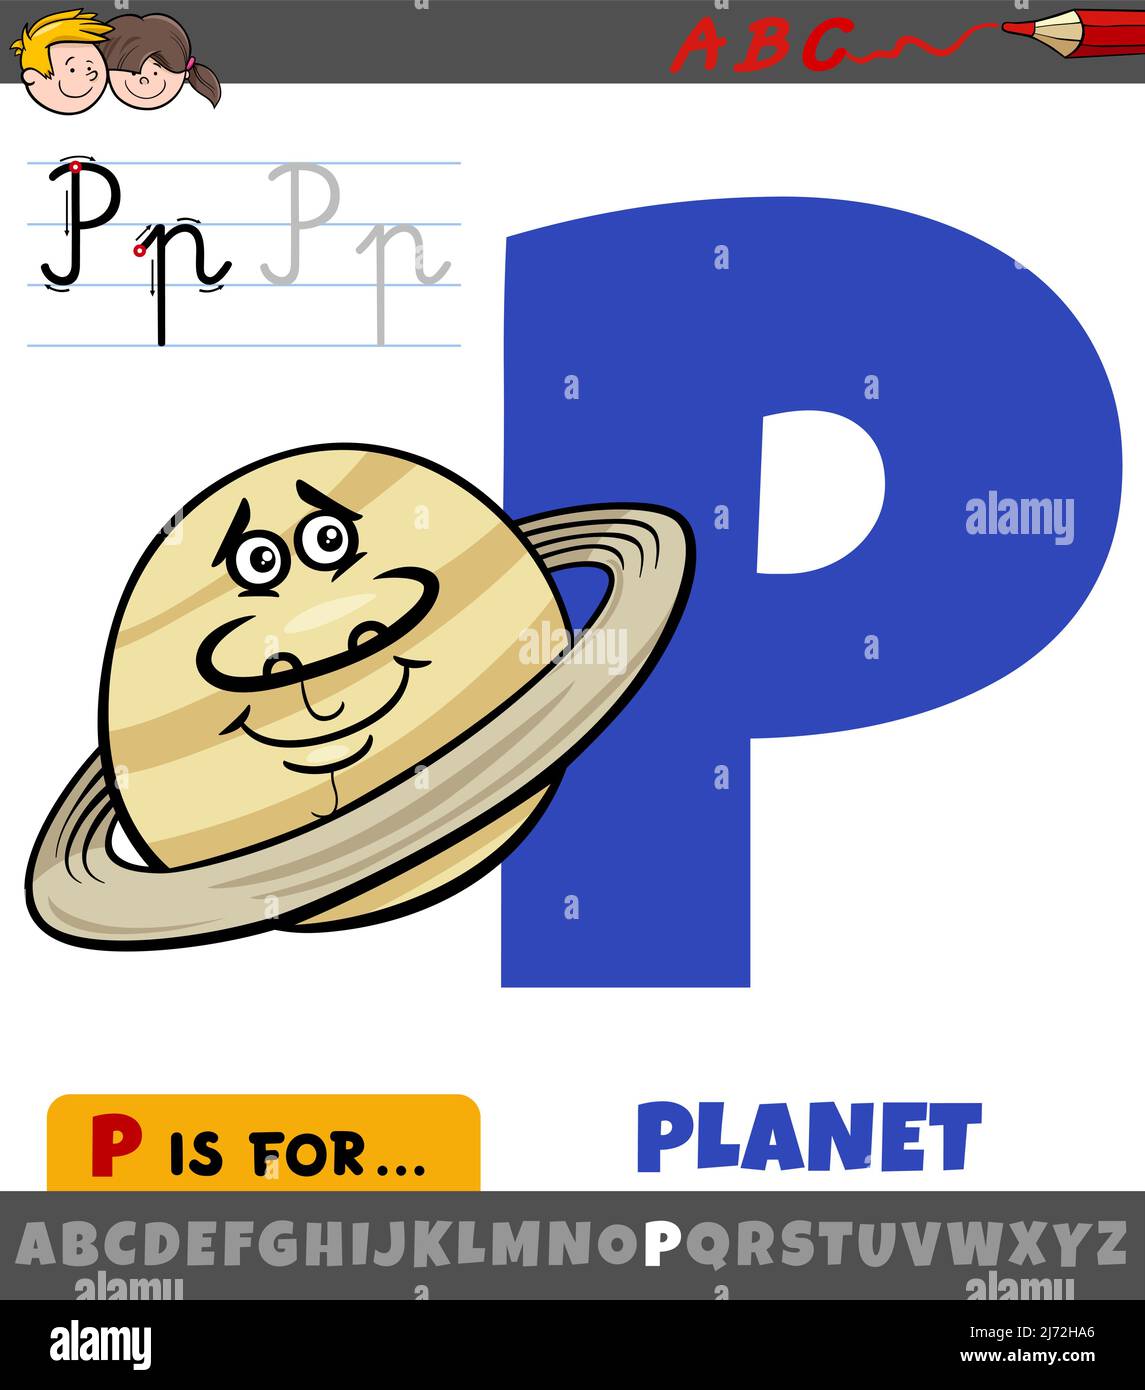 Educational cartoon illustration of letter P from alphabet with planet character Stock Vector